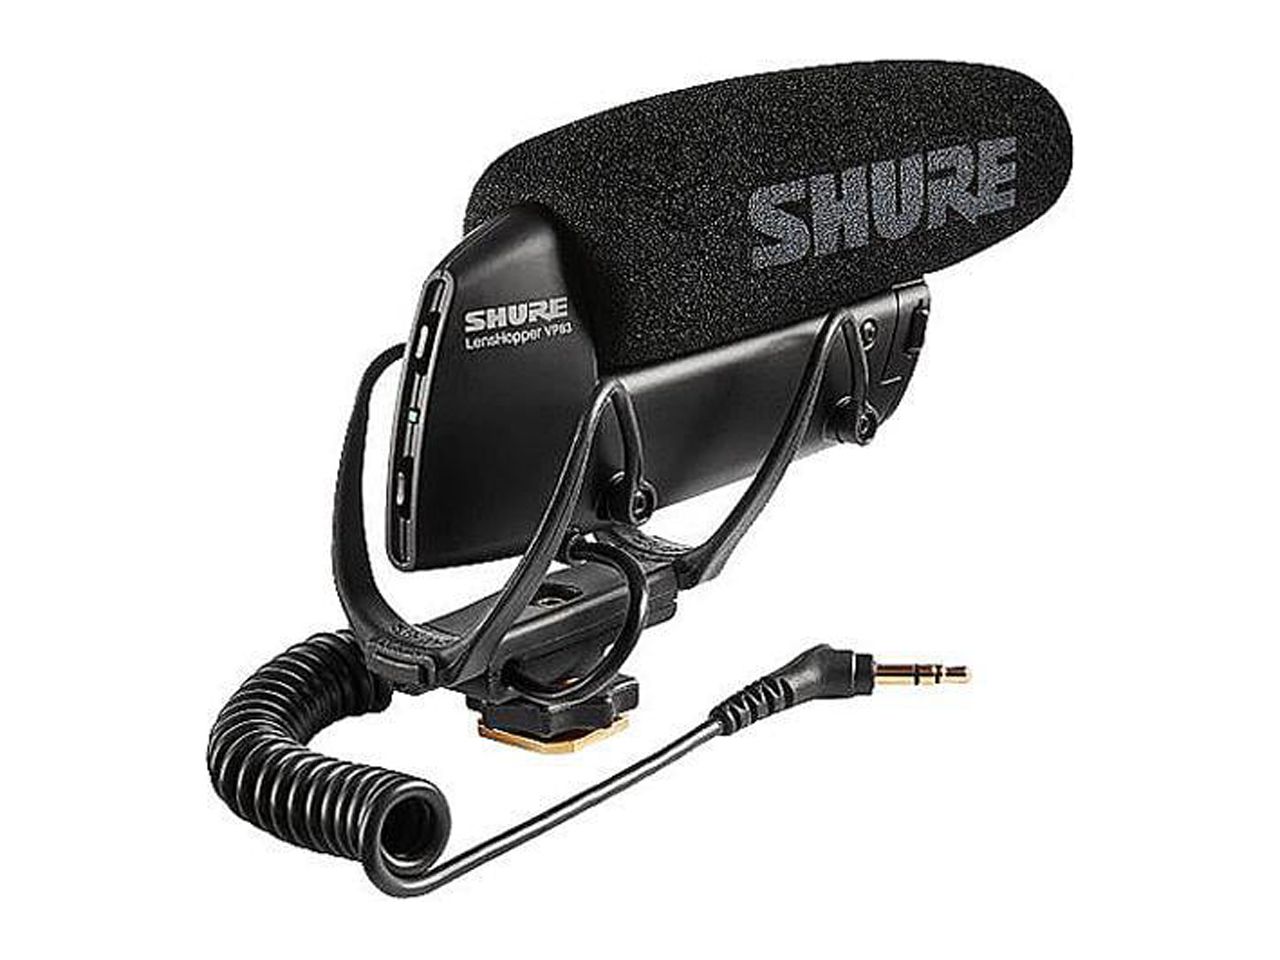 Shure VP83 LensHopper Camera-Mounted Condenser Microphone for Use with DSLR Cameras and HD Camcorders - image 1 of 14